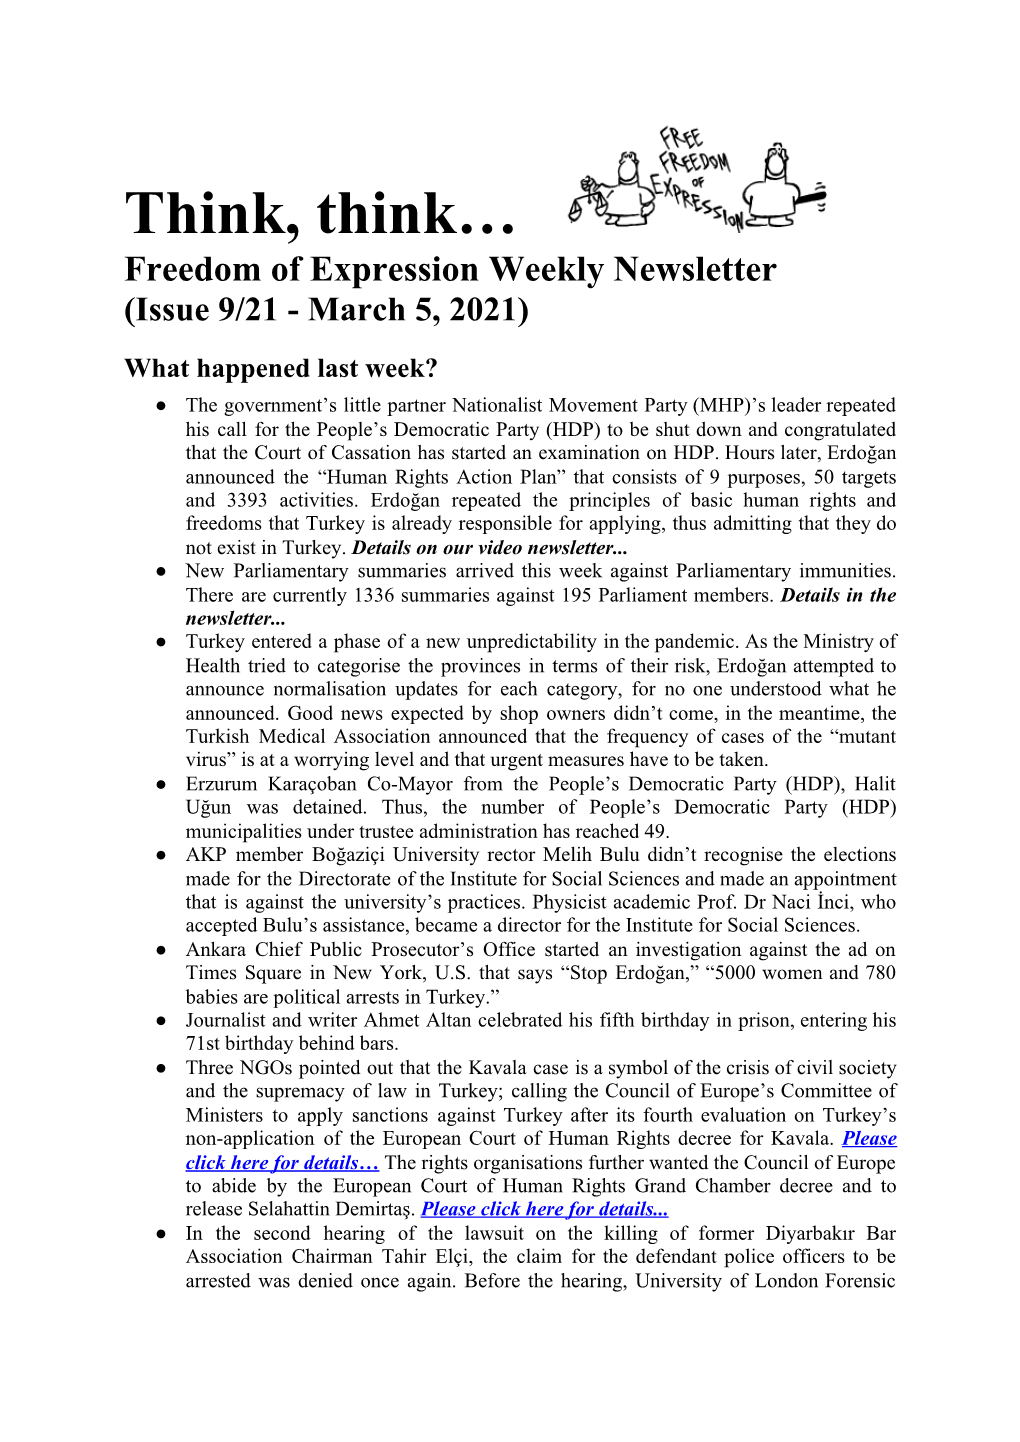 Think, Think… Freedom of Expression Weekly Newsletter (Issue 9/21 - March 5, 2021)